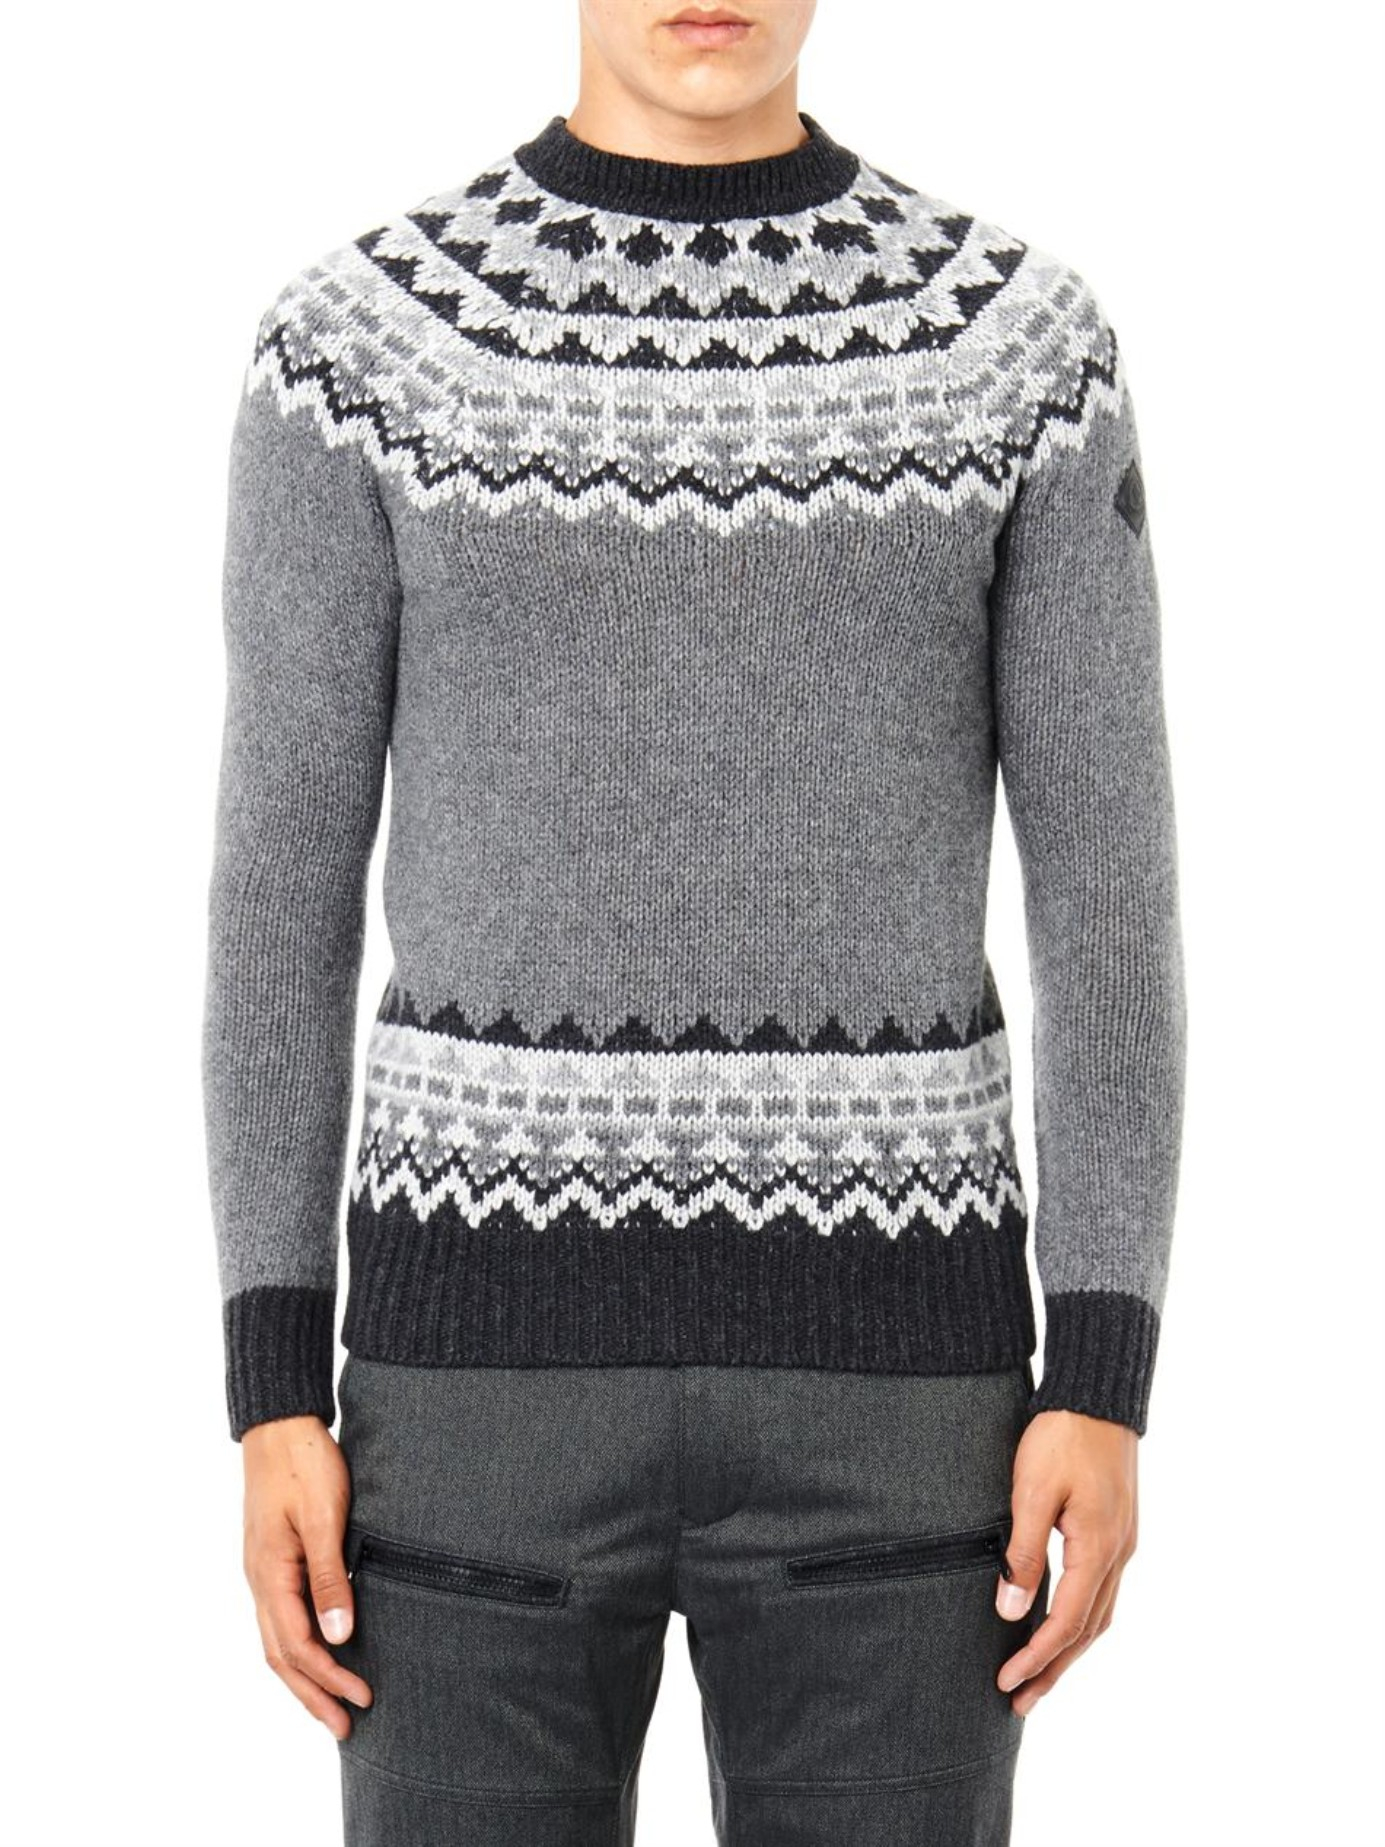 Lyst - Moncler Fair Isle Intarsia-knit Sweater in Gray for Men